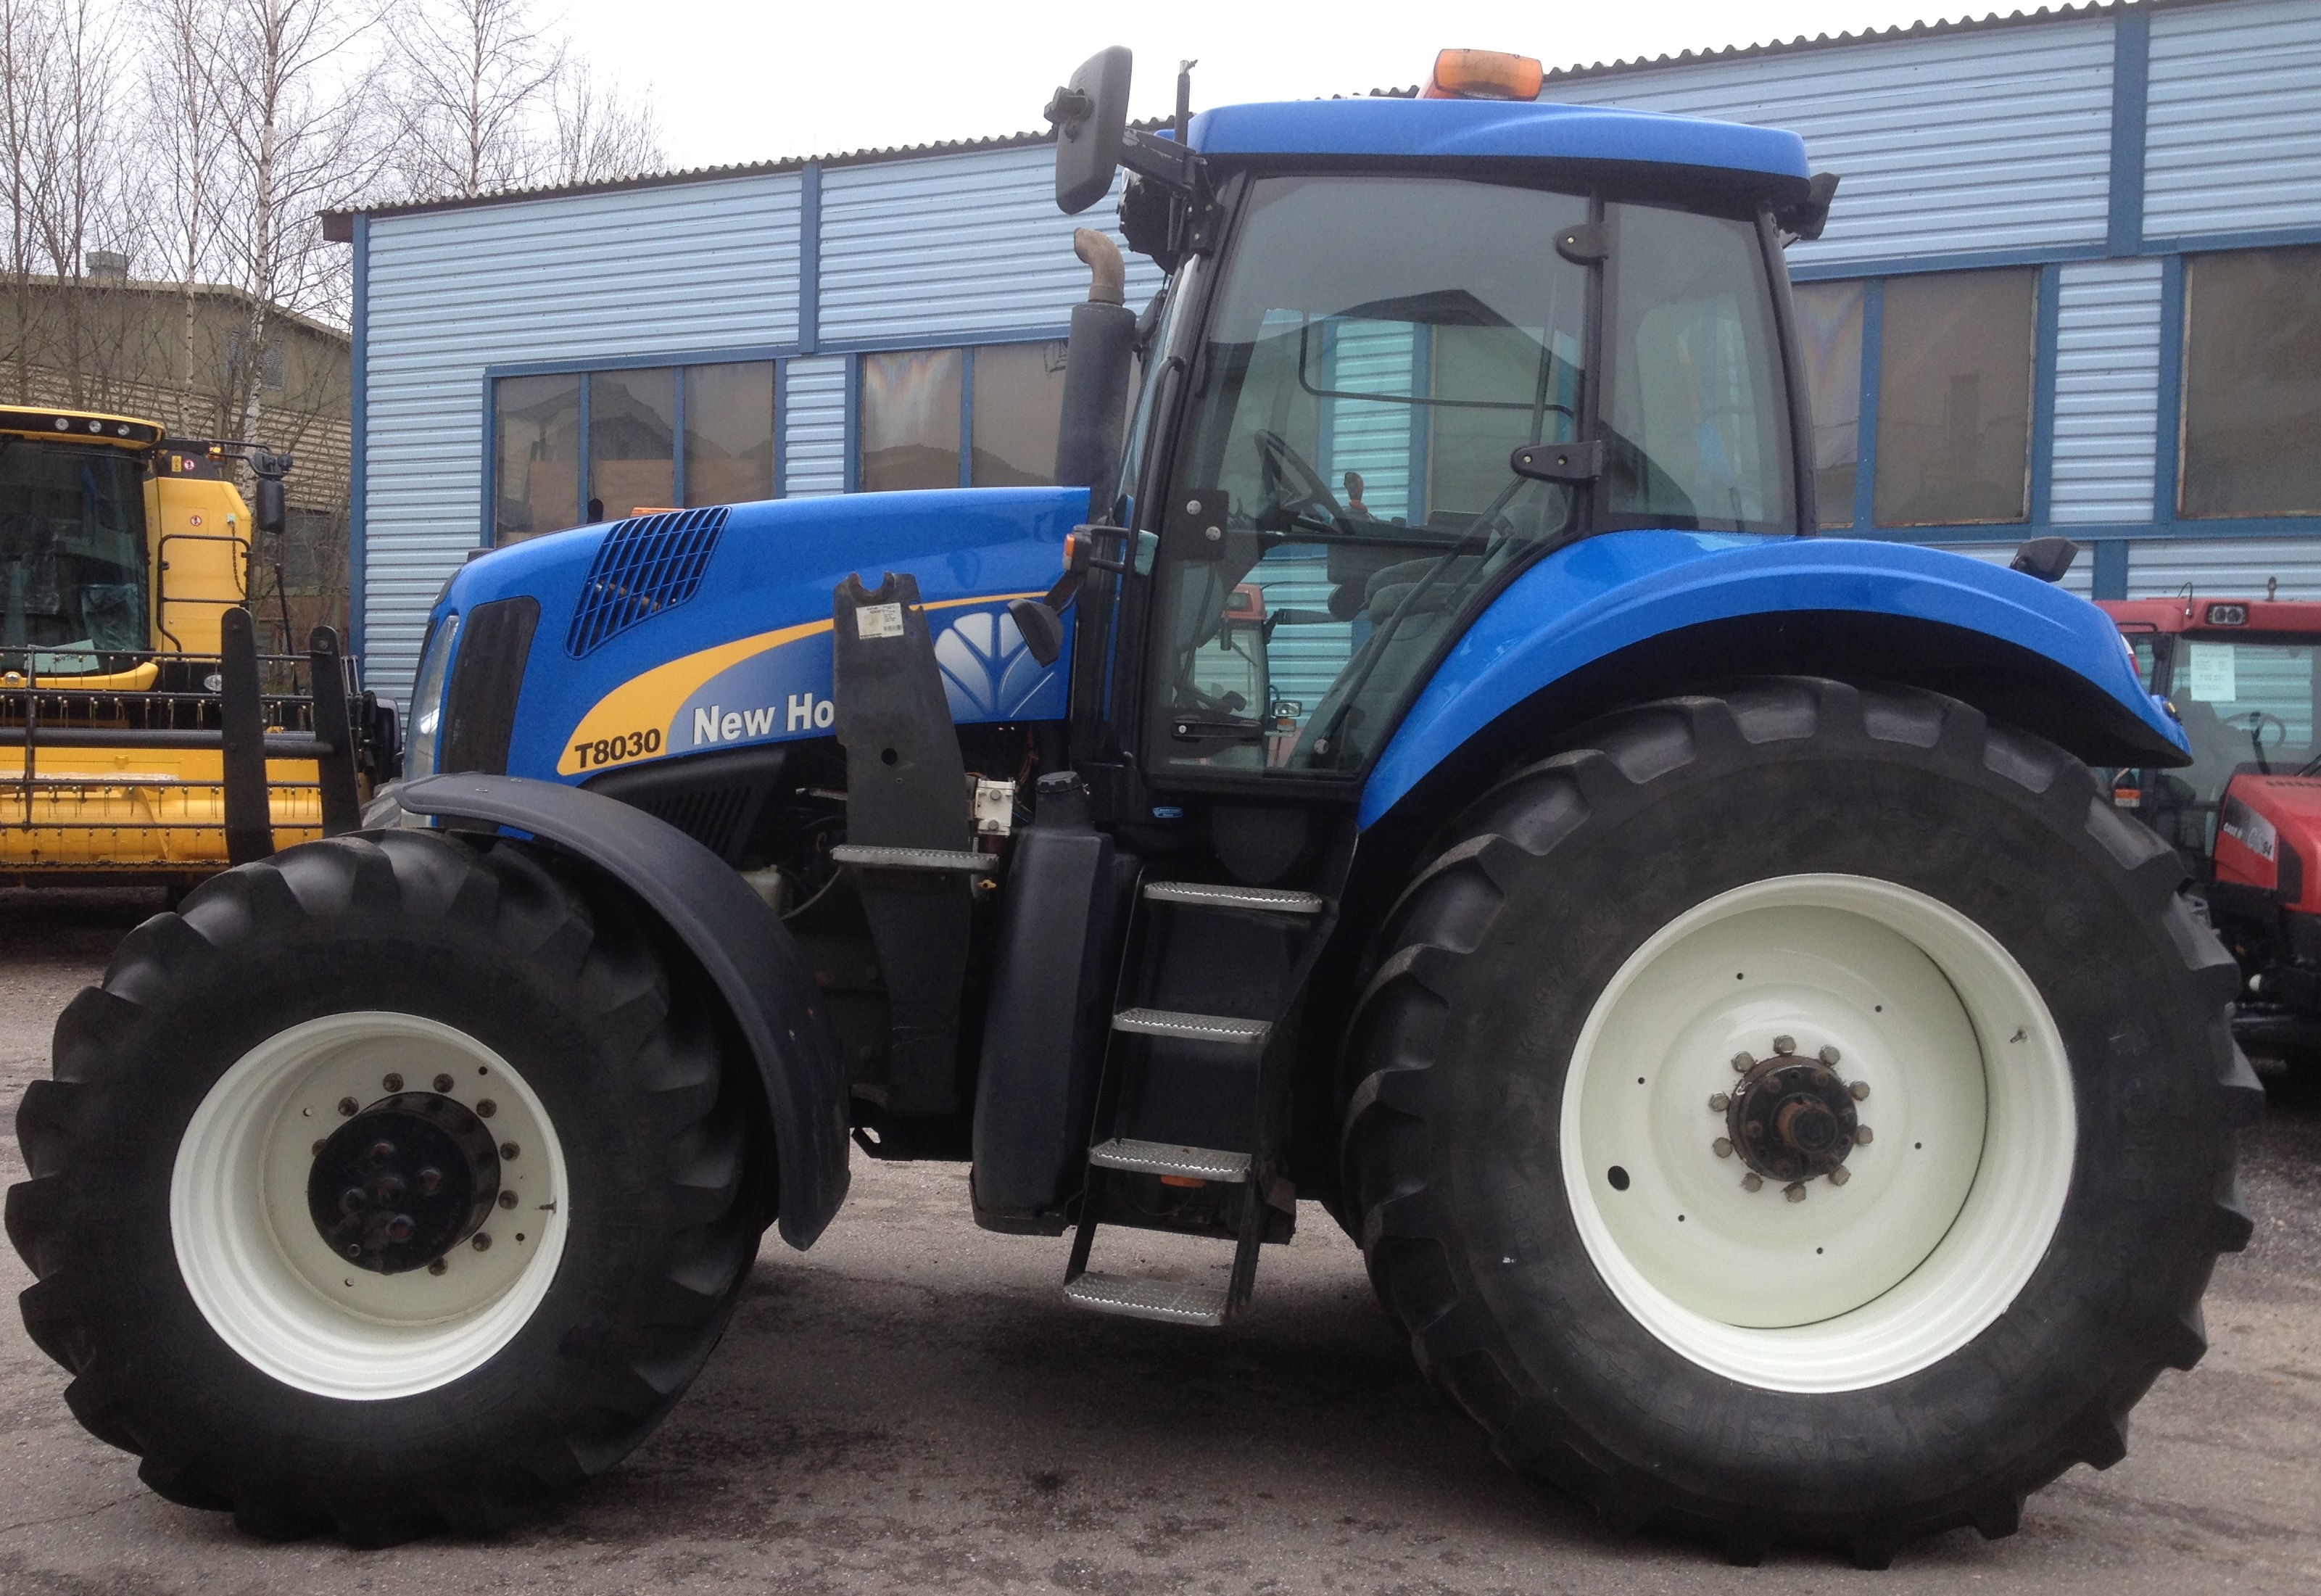 Details on this New Holland T8030